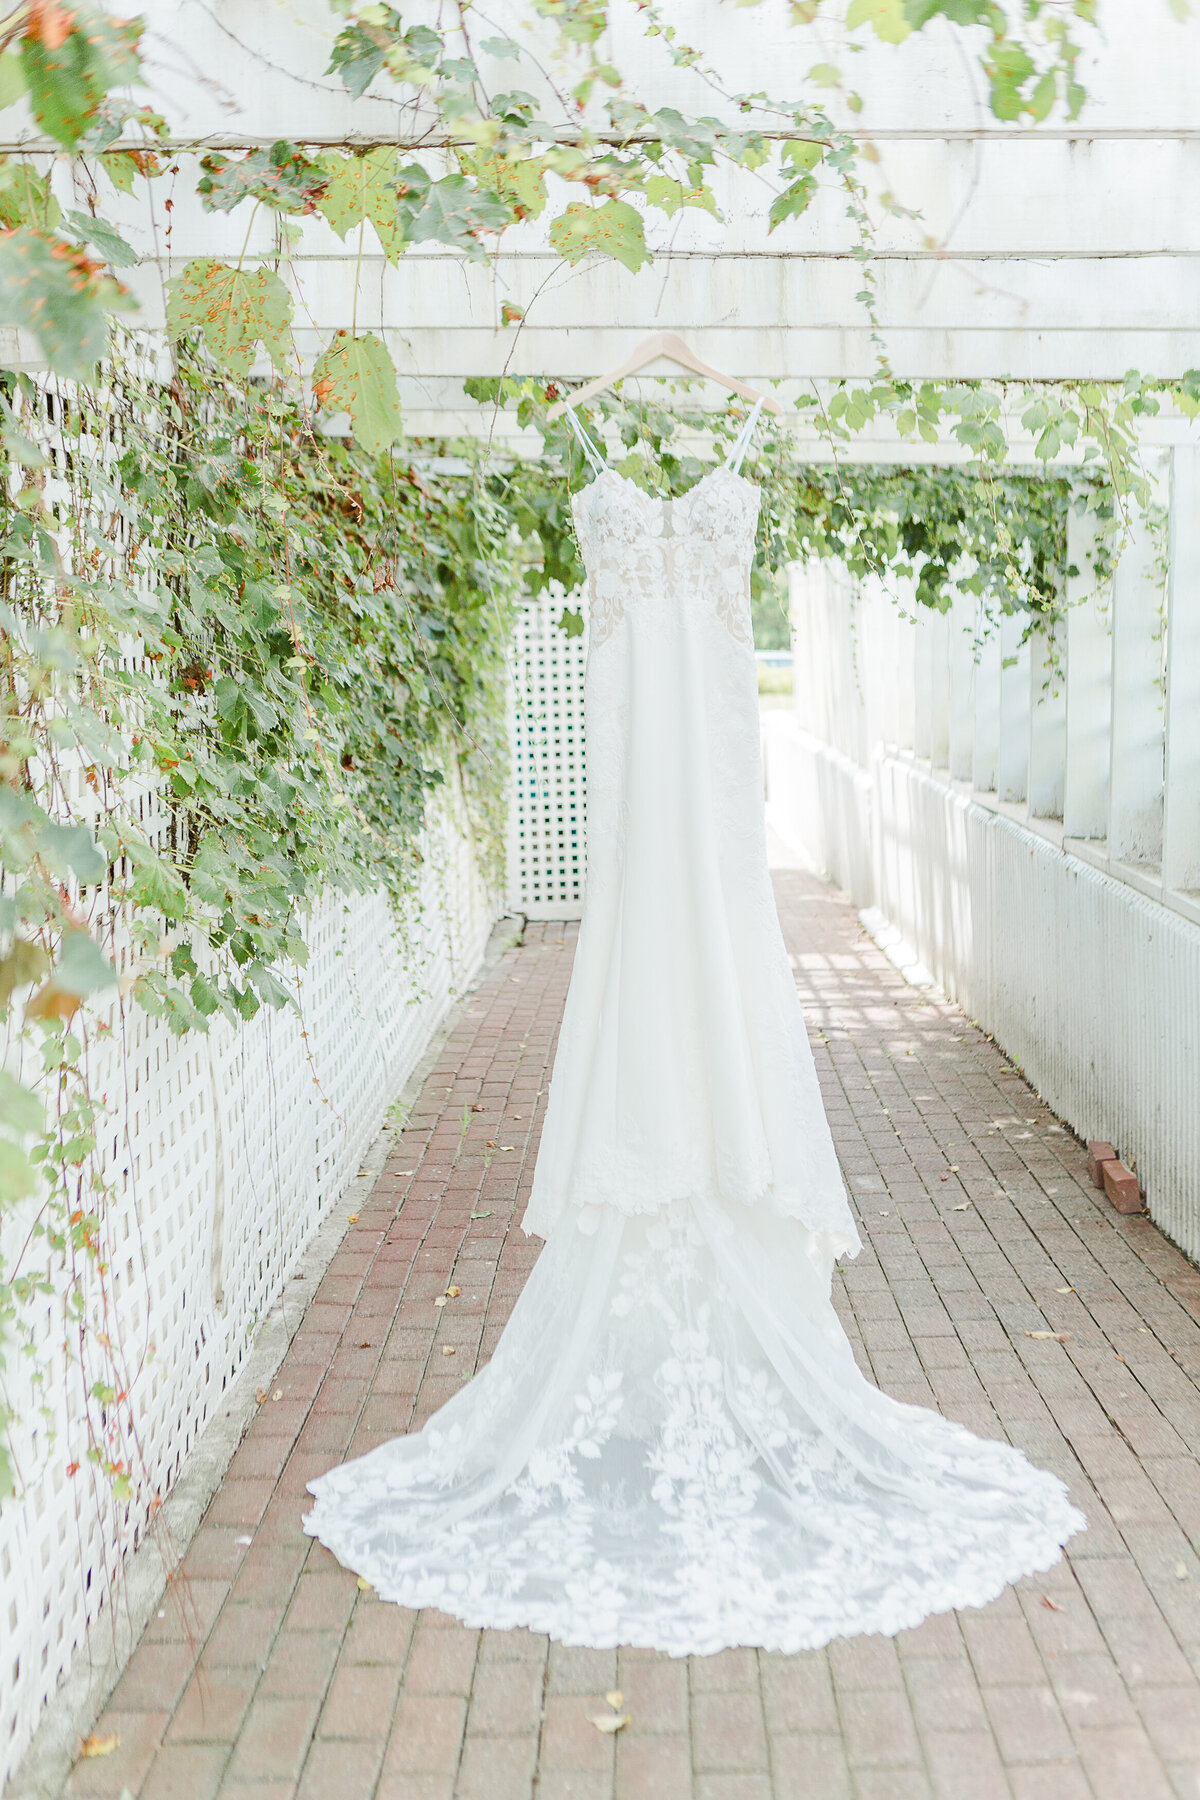 Detail image of the bride's wedding dress hanging from the pergola at the Five Bridge Inn. Captured by best Massachusetts wedding photographer Lia Rose Weddings.